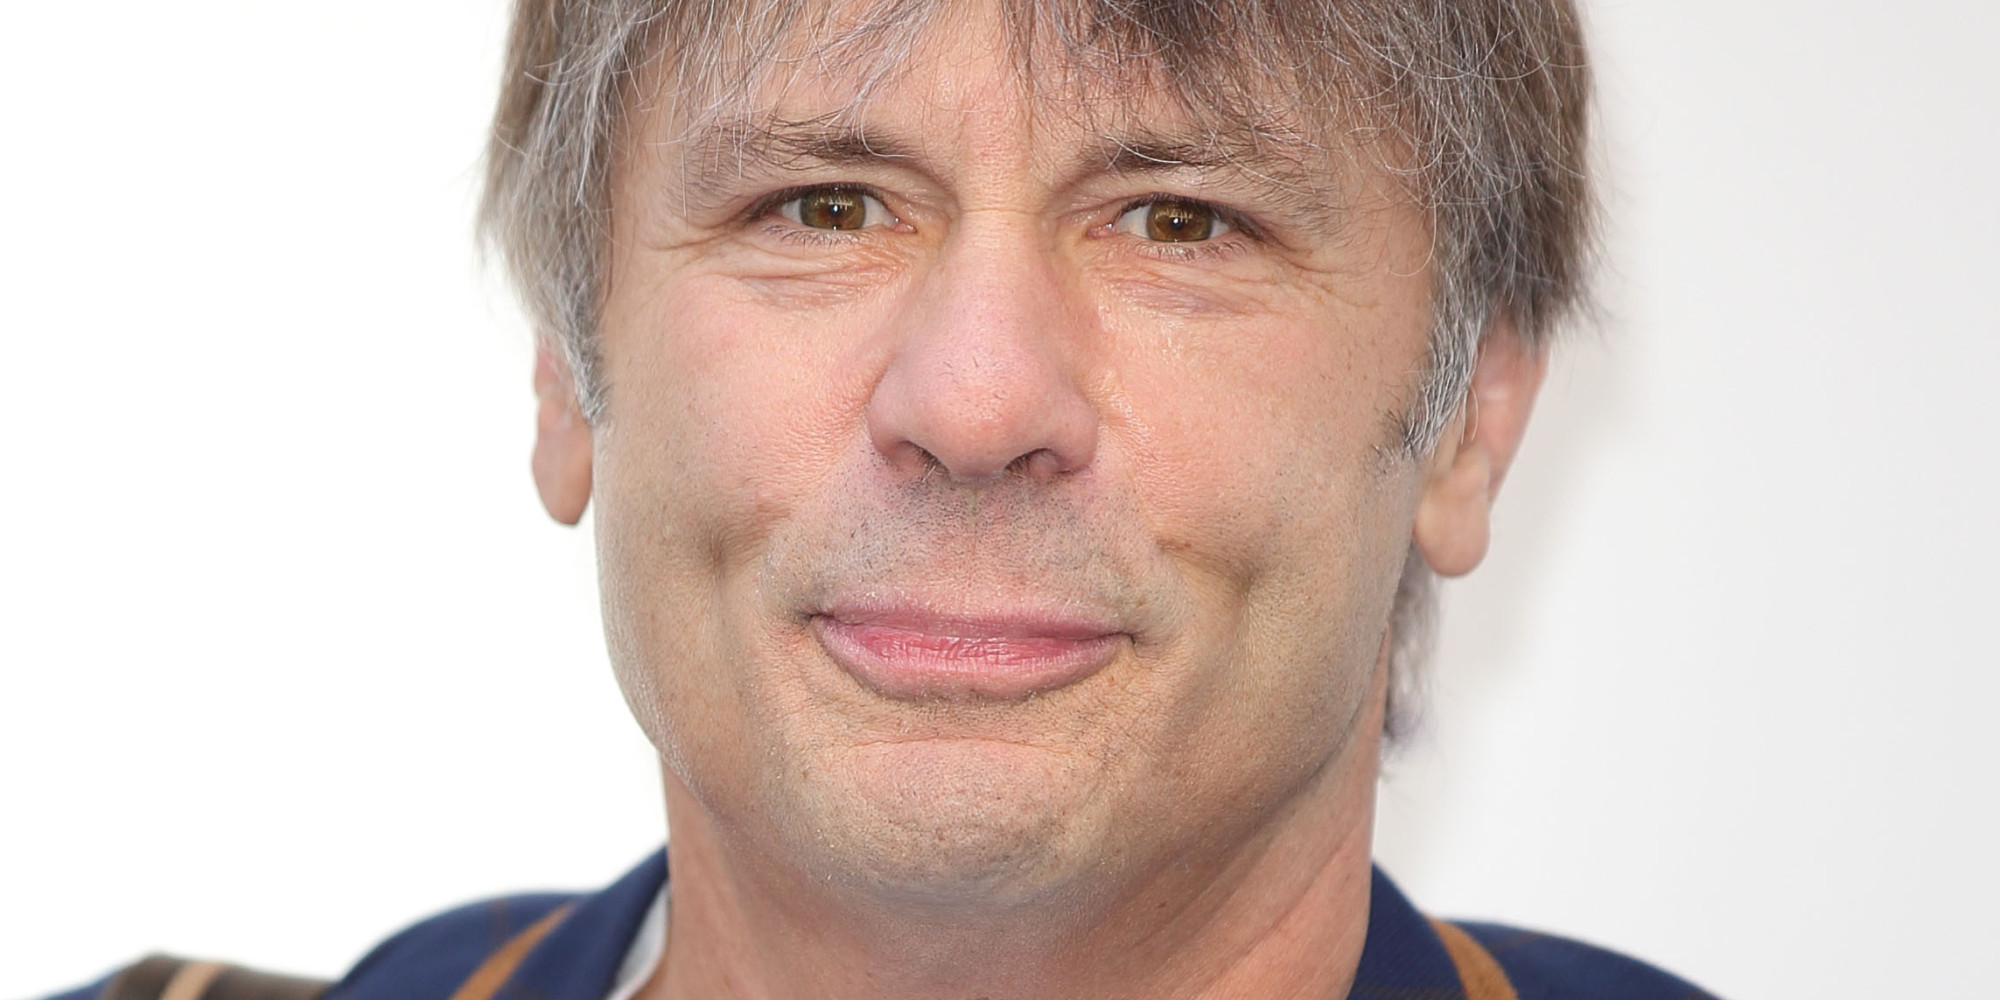 Iron Maiden Singer Bruce Dickinson Says His Tongue Cancer Was Caused By Too Much Oral Sex